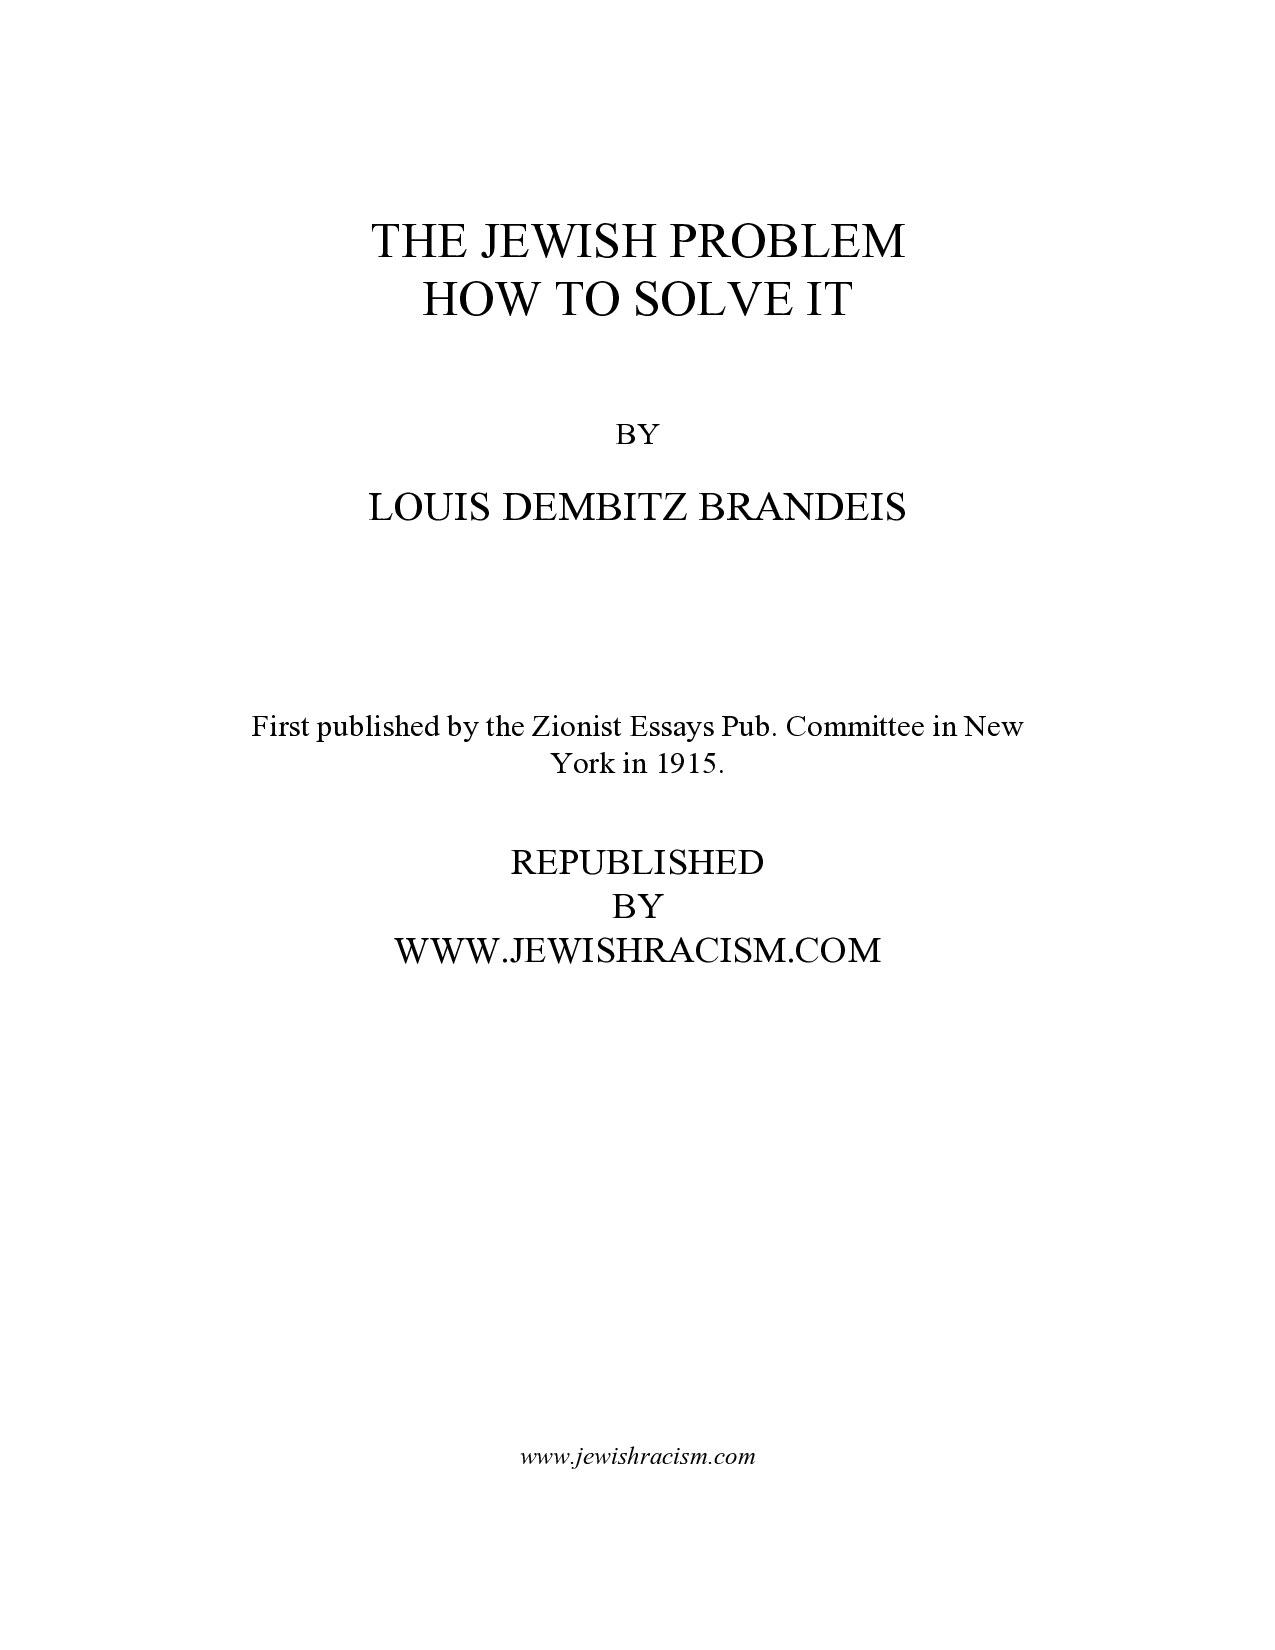 Brandeis, Louis; The Jewish Problem And How To Solve It